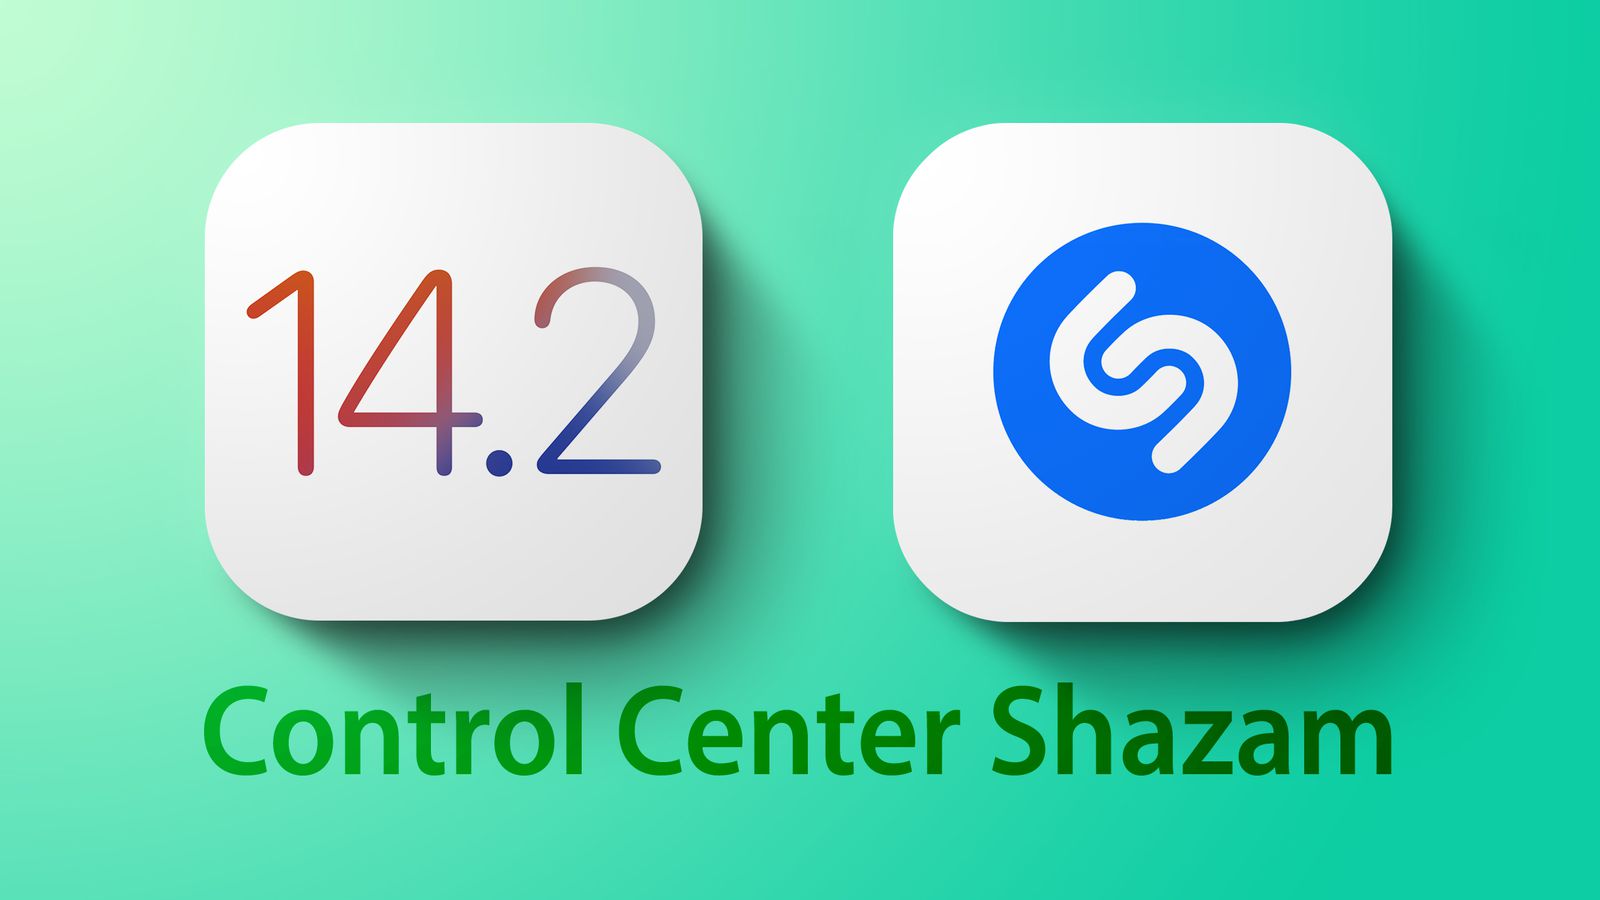 iOS  Beta Adds New Shazam Music Recognition Feature for Control Center  - MacRumors